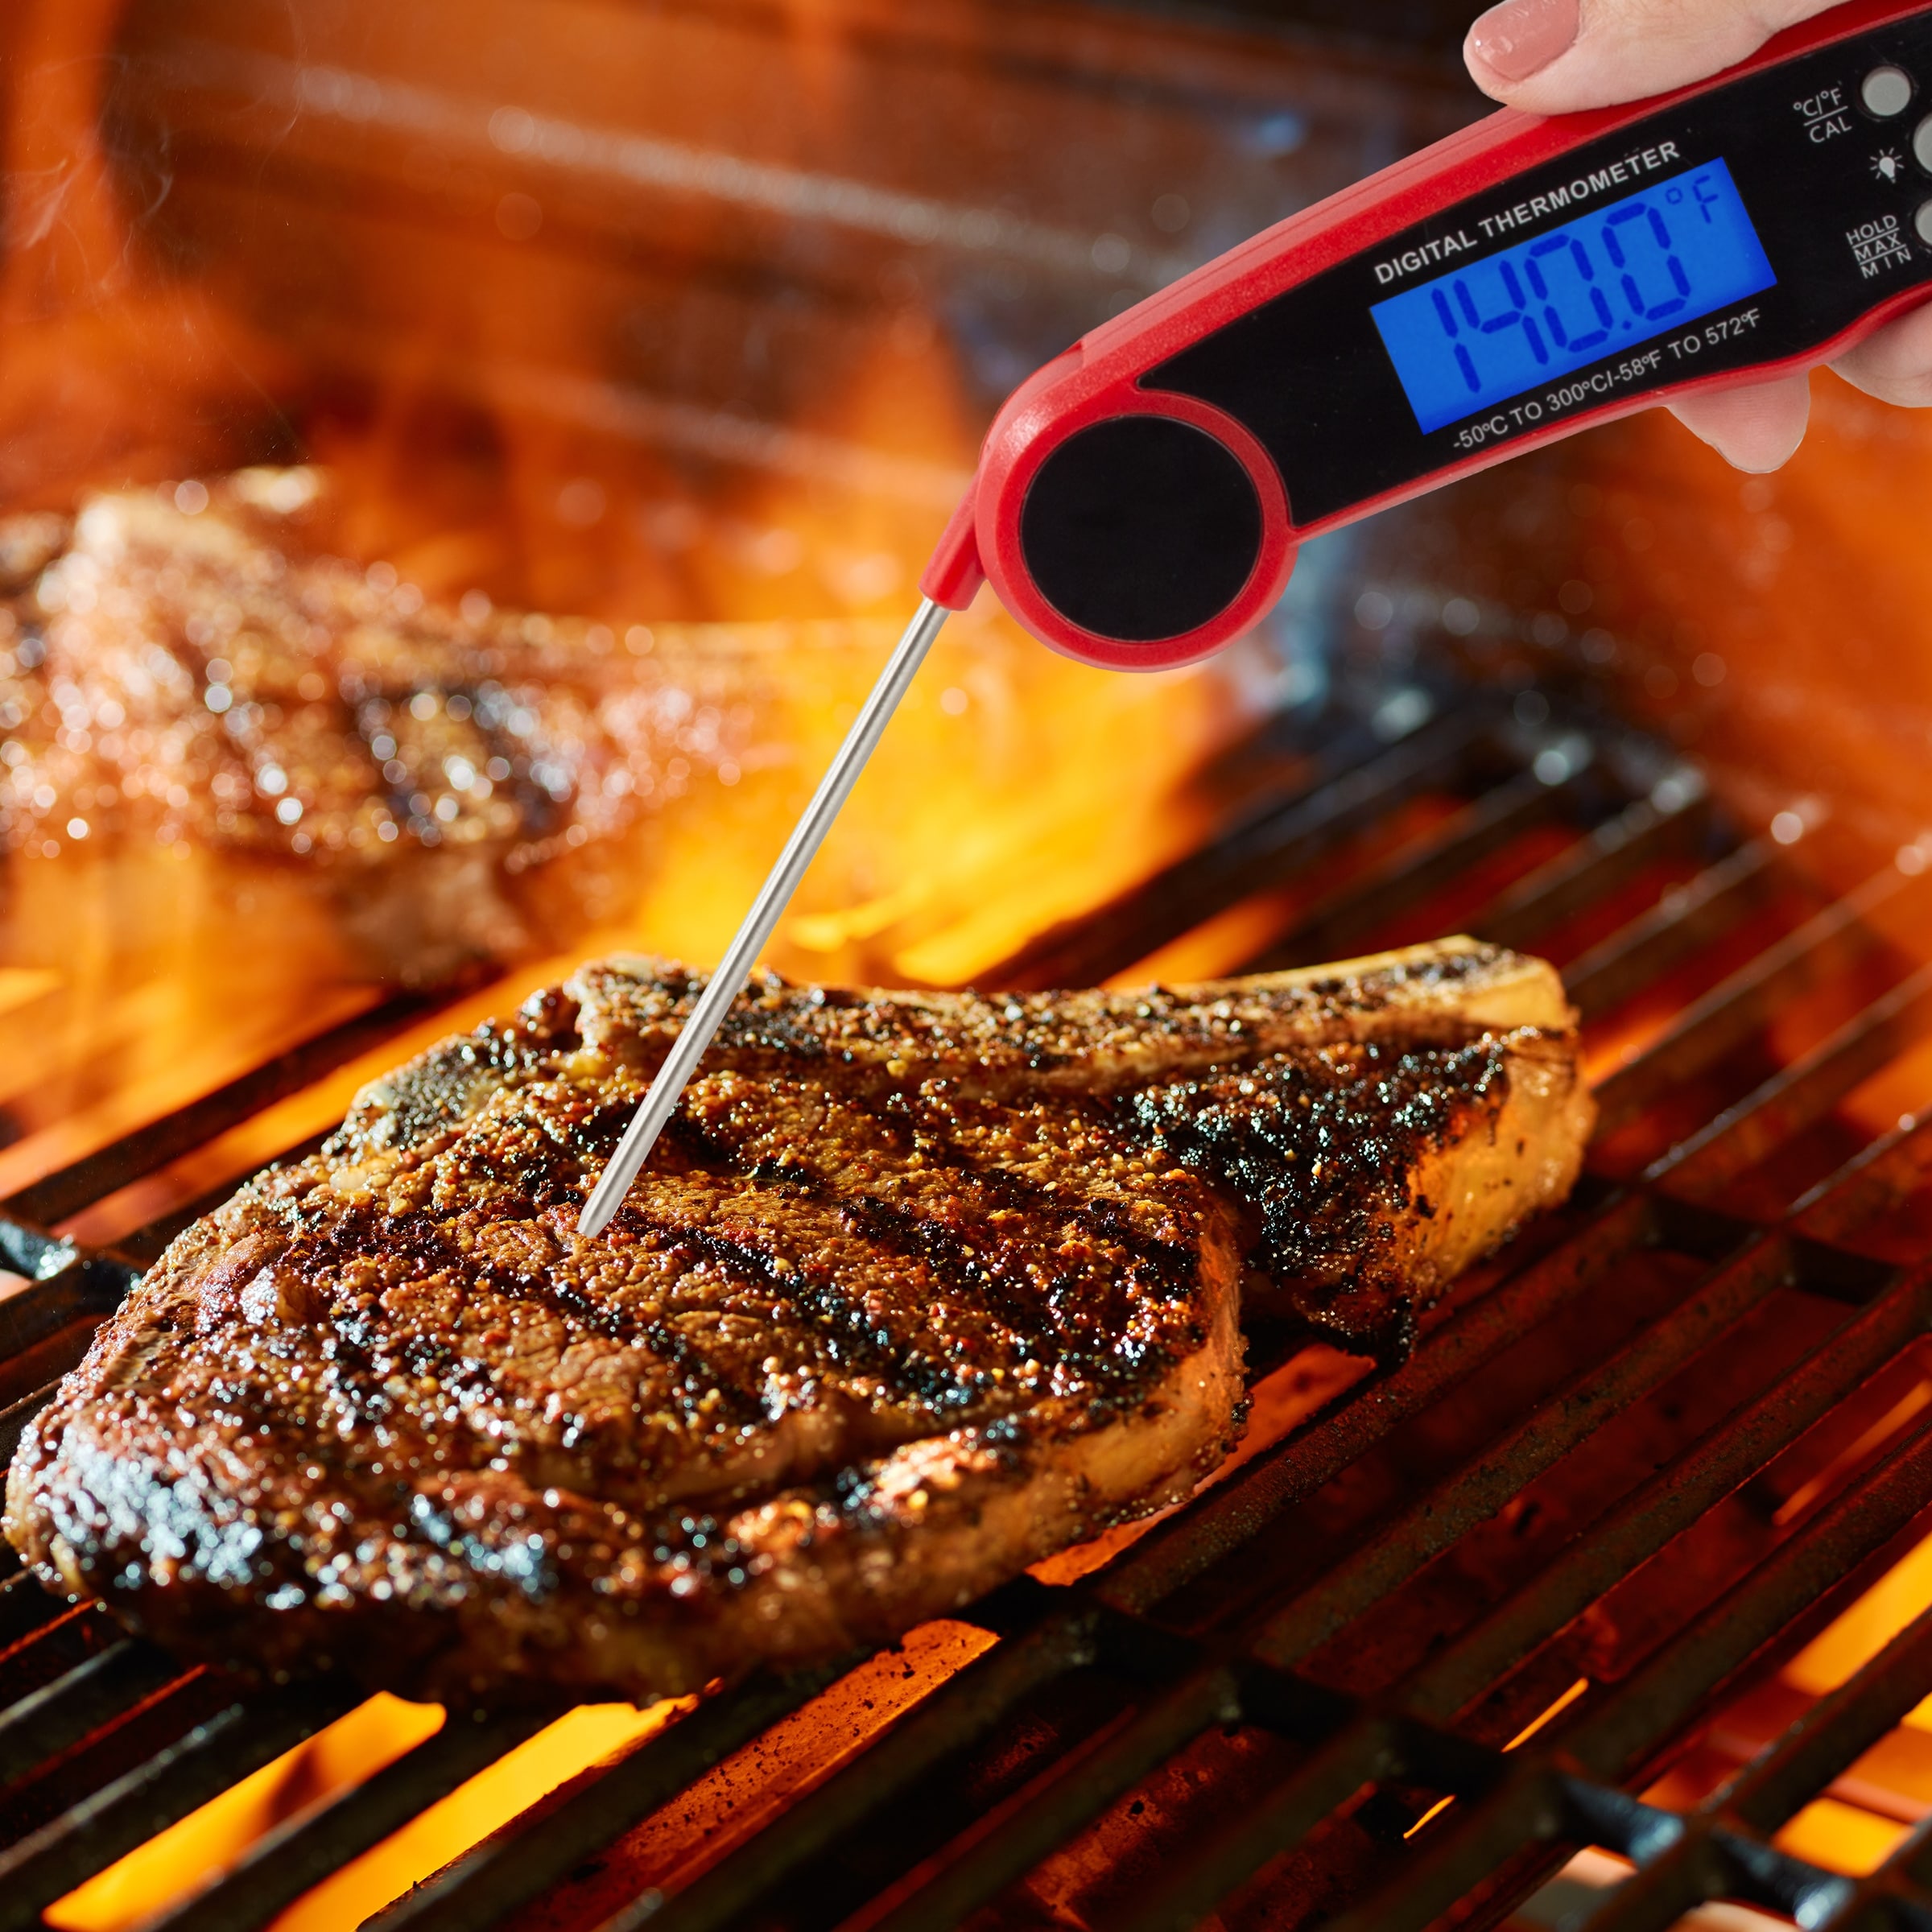 https://ak1.ostkcdn.com/images/products/is/images/direct/fe111b67dabdc84eca3ca6aaedb9b974c430316b/Instant-Read-Food-Thermometer---Water-Resistant-Digital-Thermometer-with-Magnetic-Back-by-Home-Complete.jpg